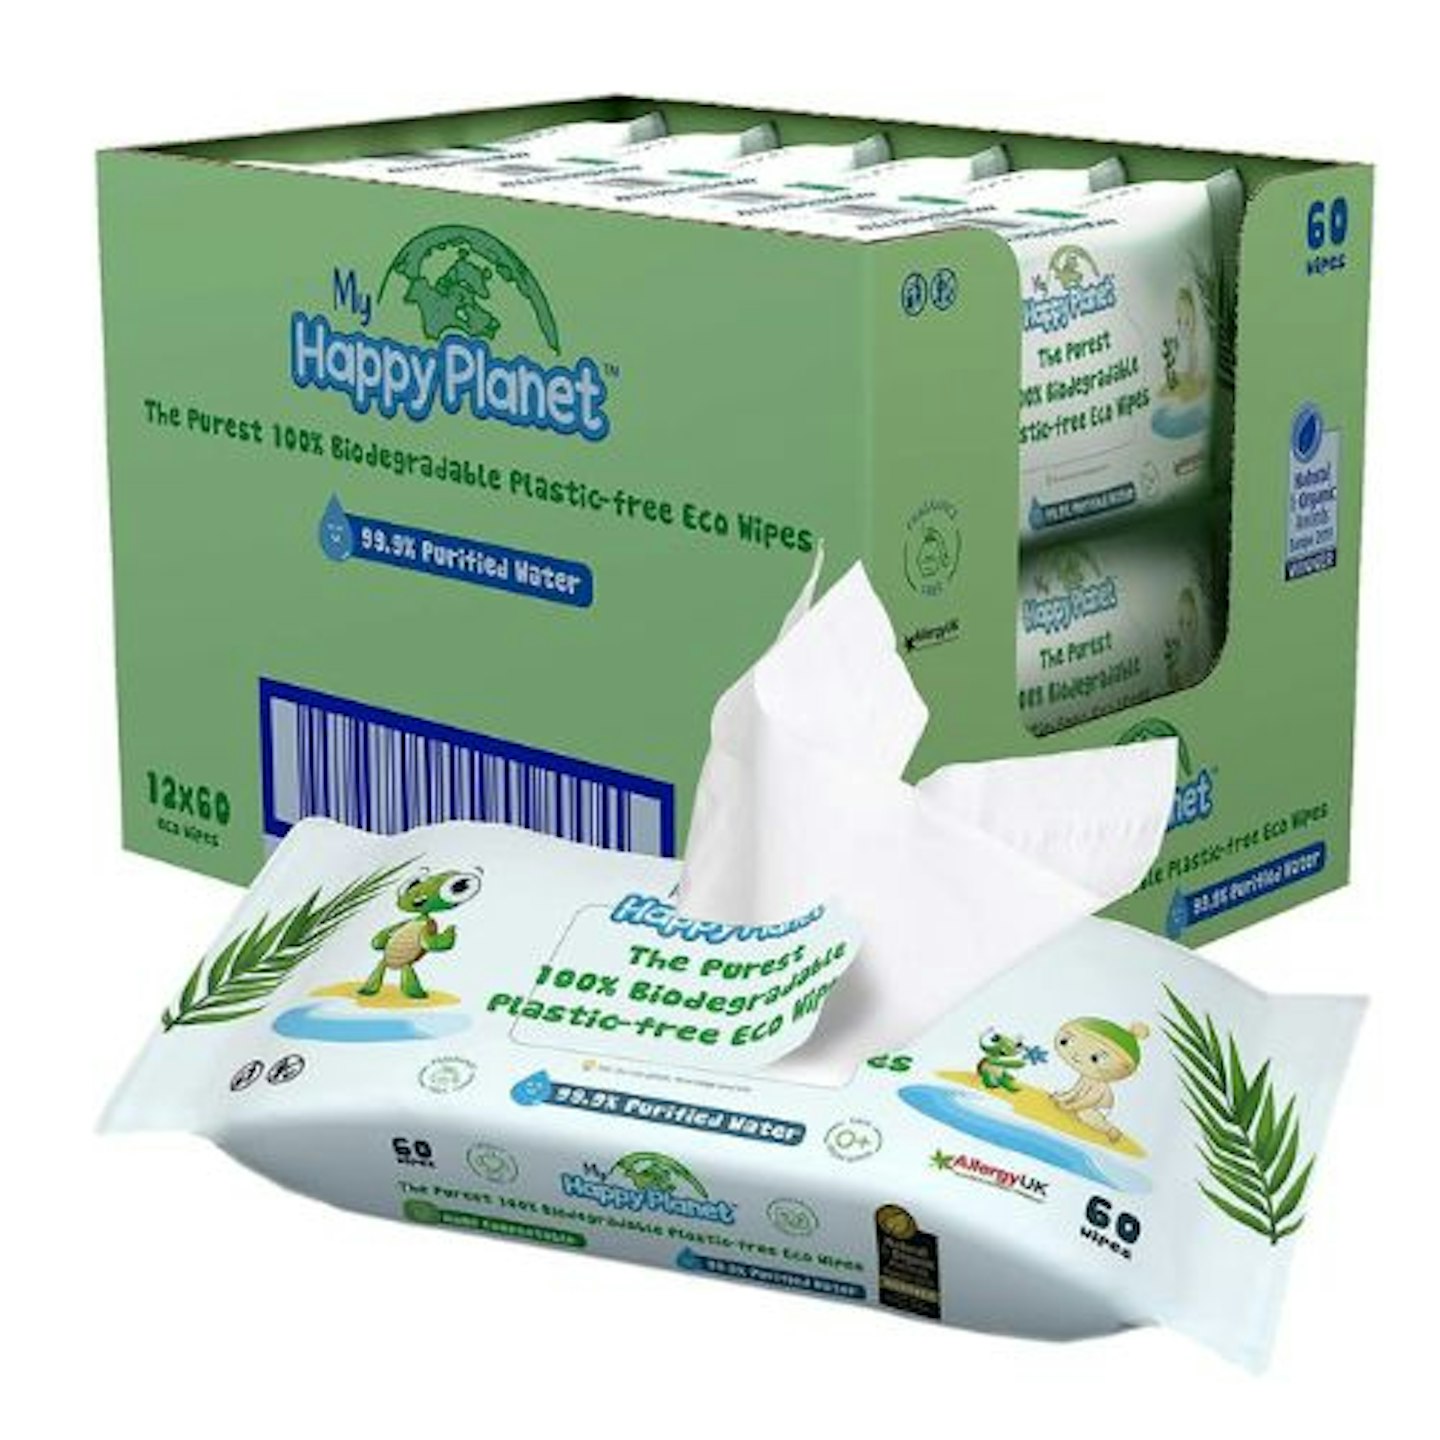 My Happy Planet 100% Biodegradable, Plastic Free Baby Wipes 